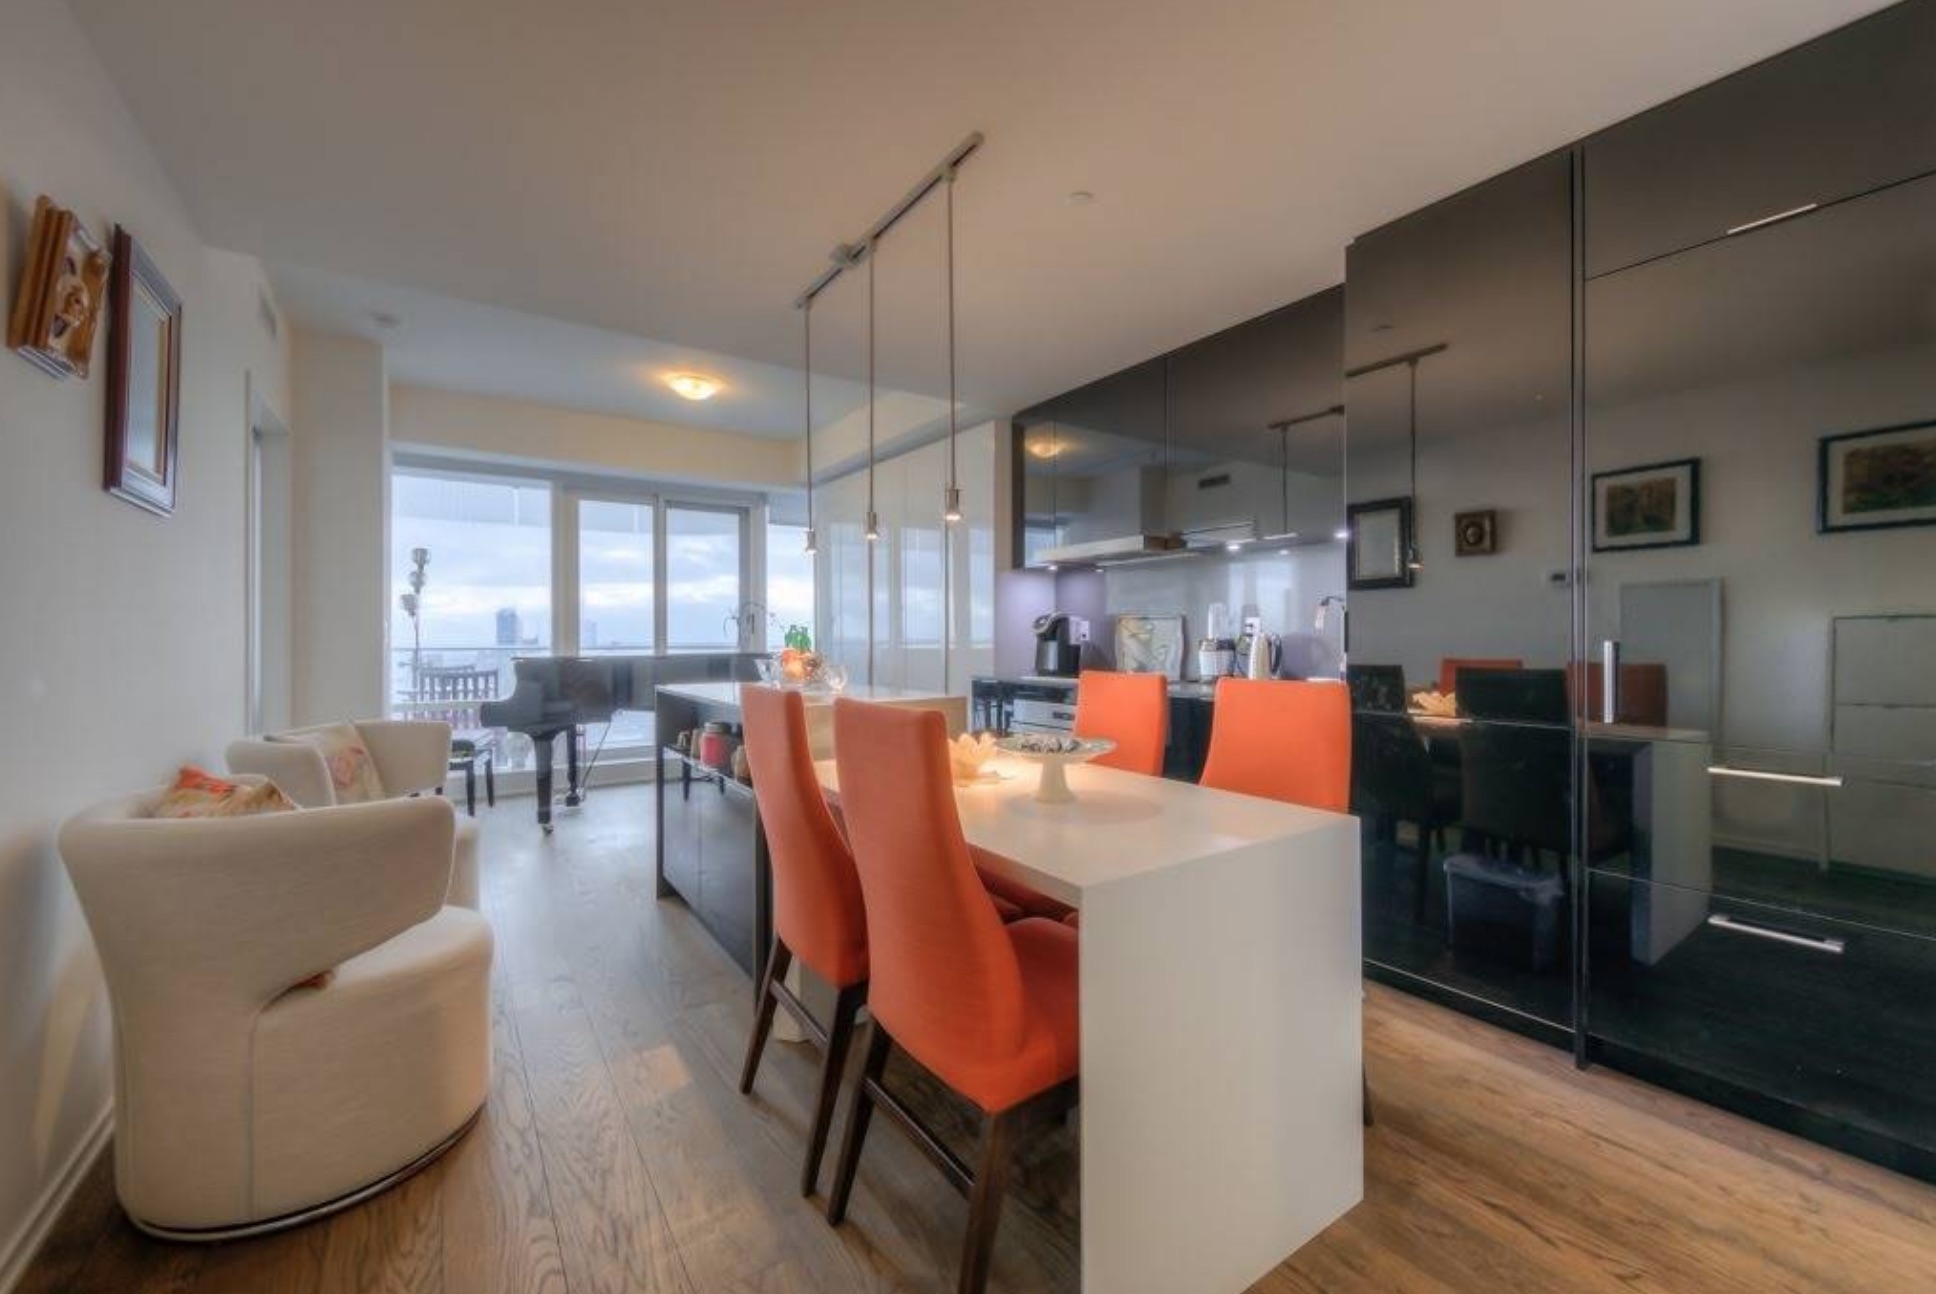 One-bedroom condo unit with white kitchen island and large black cabinets and cabinetry